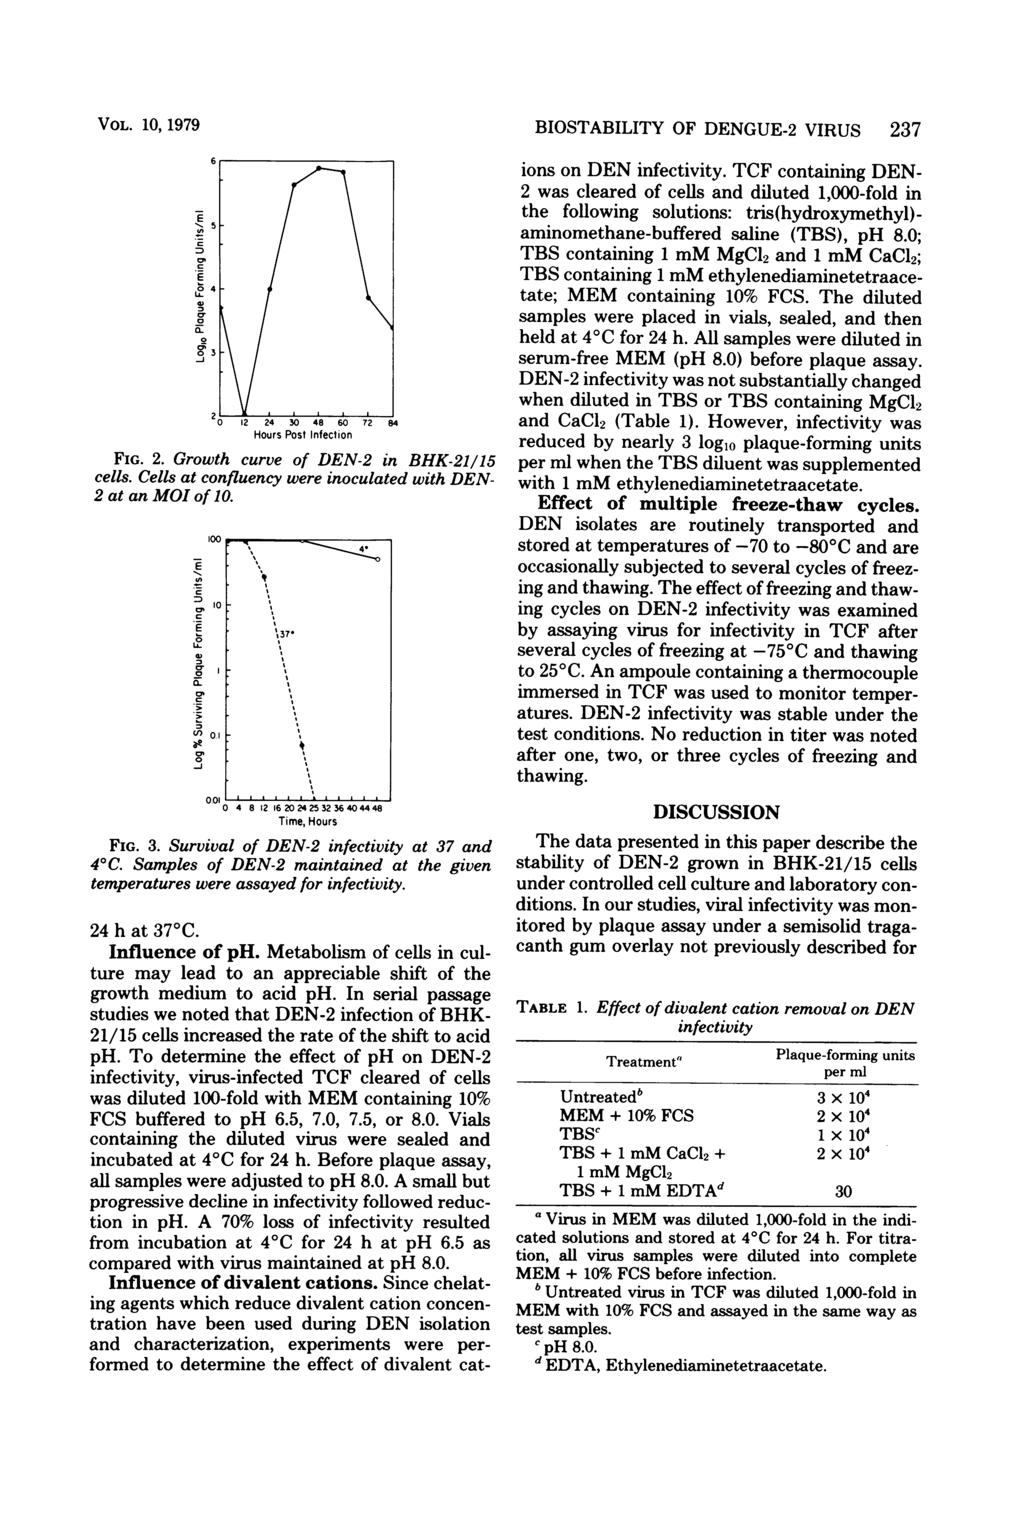 VOL. 10, 1979 E -5 54- a- o3 0 12 24 30 48 60 72 84 Hours Post Infection FIG. 2. Growth curve of DEN-2 in BHK-21/15 cells. Cells at confluency were inoculated with DEN- 2 at an MOI of 10. r-.e cr D.